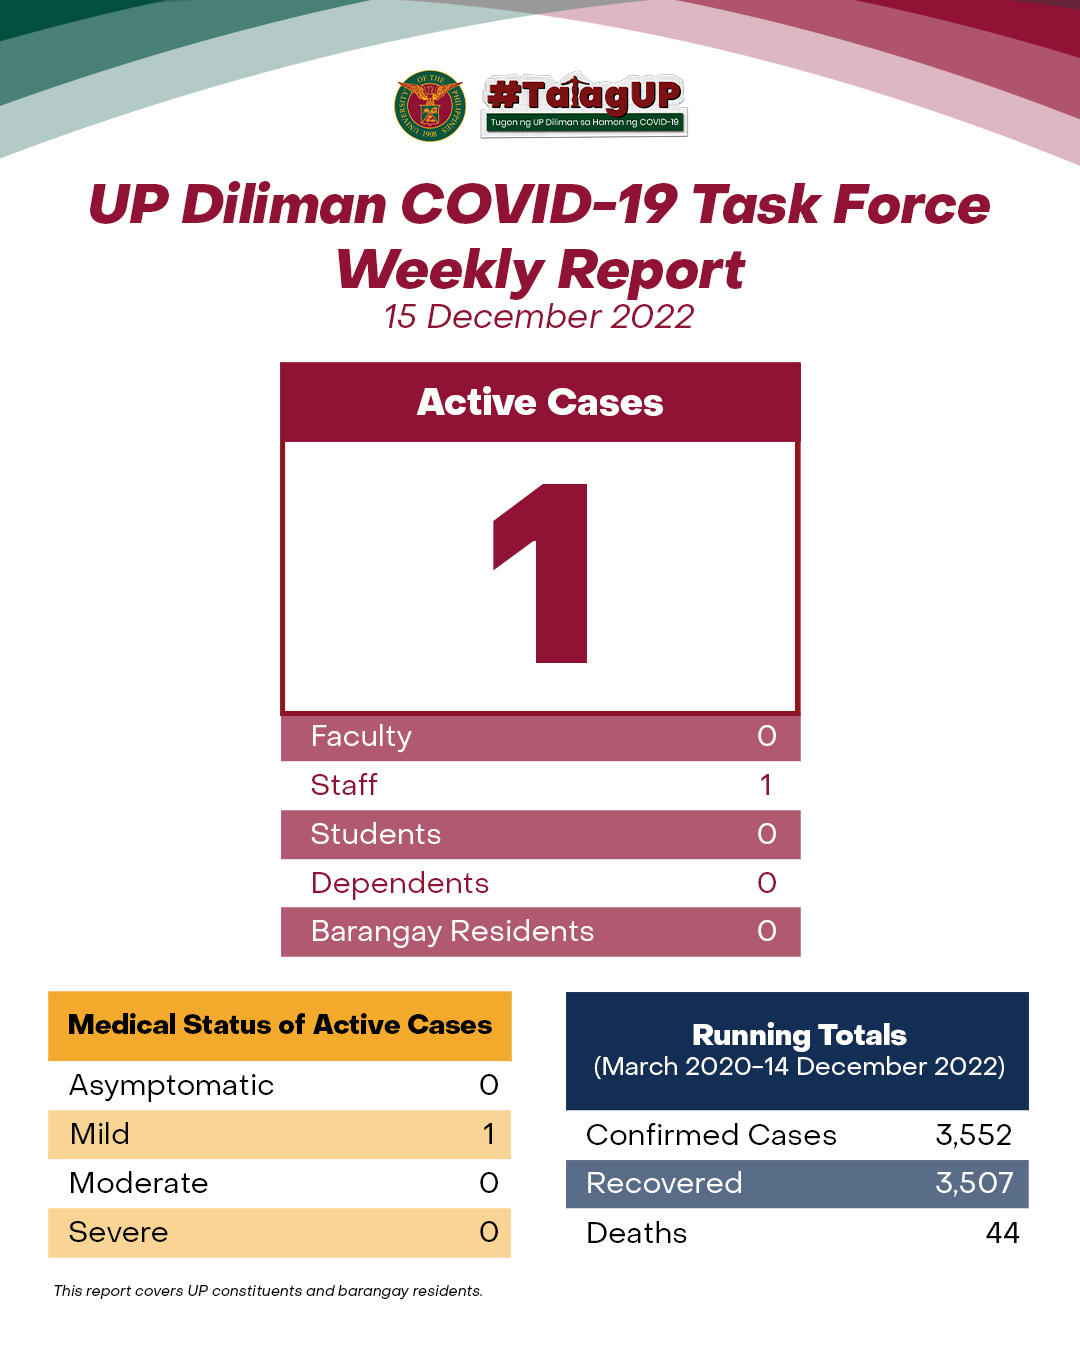 UP Diliman COVID-19 Task Force Weekly Report (15 December 2022)